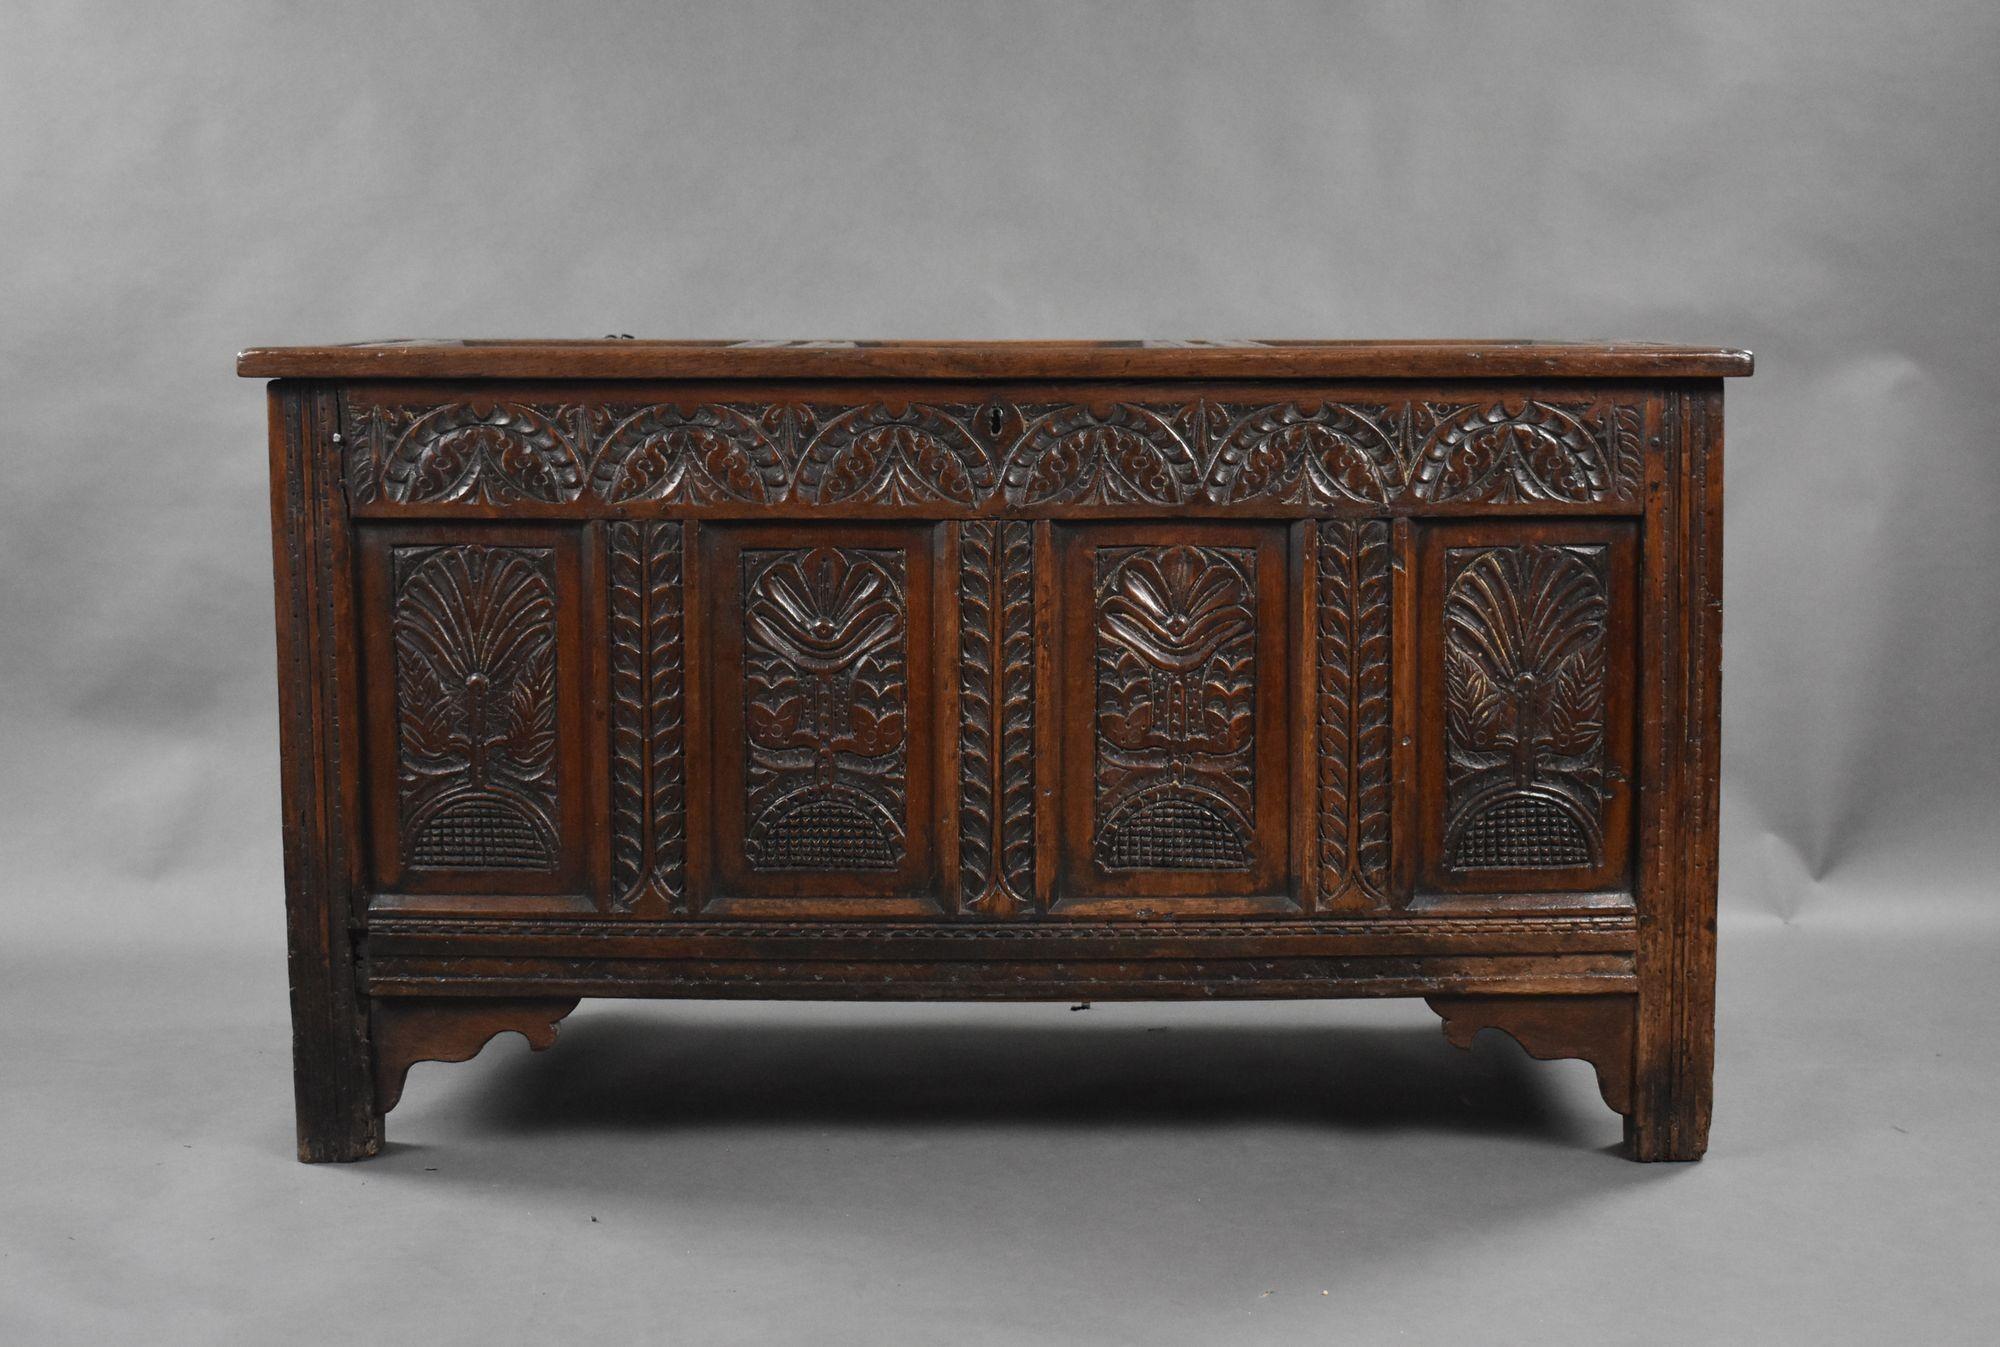 For sale is a good quality 18th century carved oak coffer, with a triple panel hinged top and carved frieze, over four carved panels to the front. This piece is in very good condition for its age.
Width: 129cm Depth: 53cm Height: 72cm